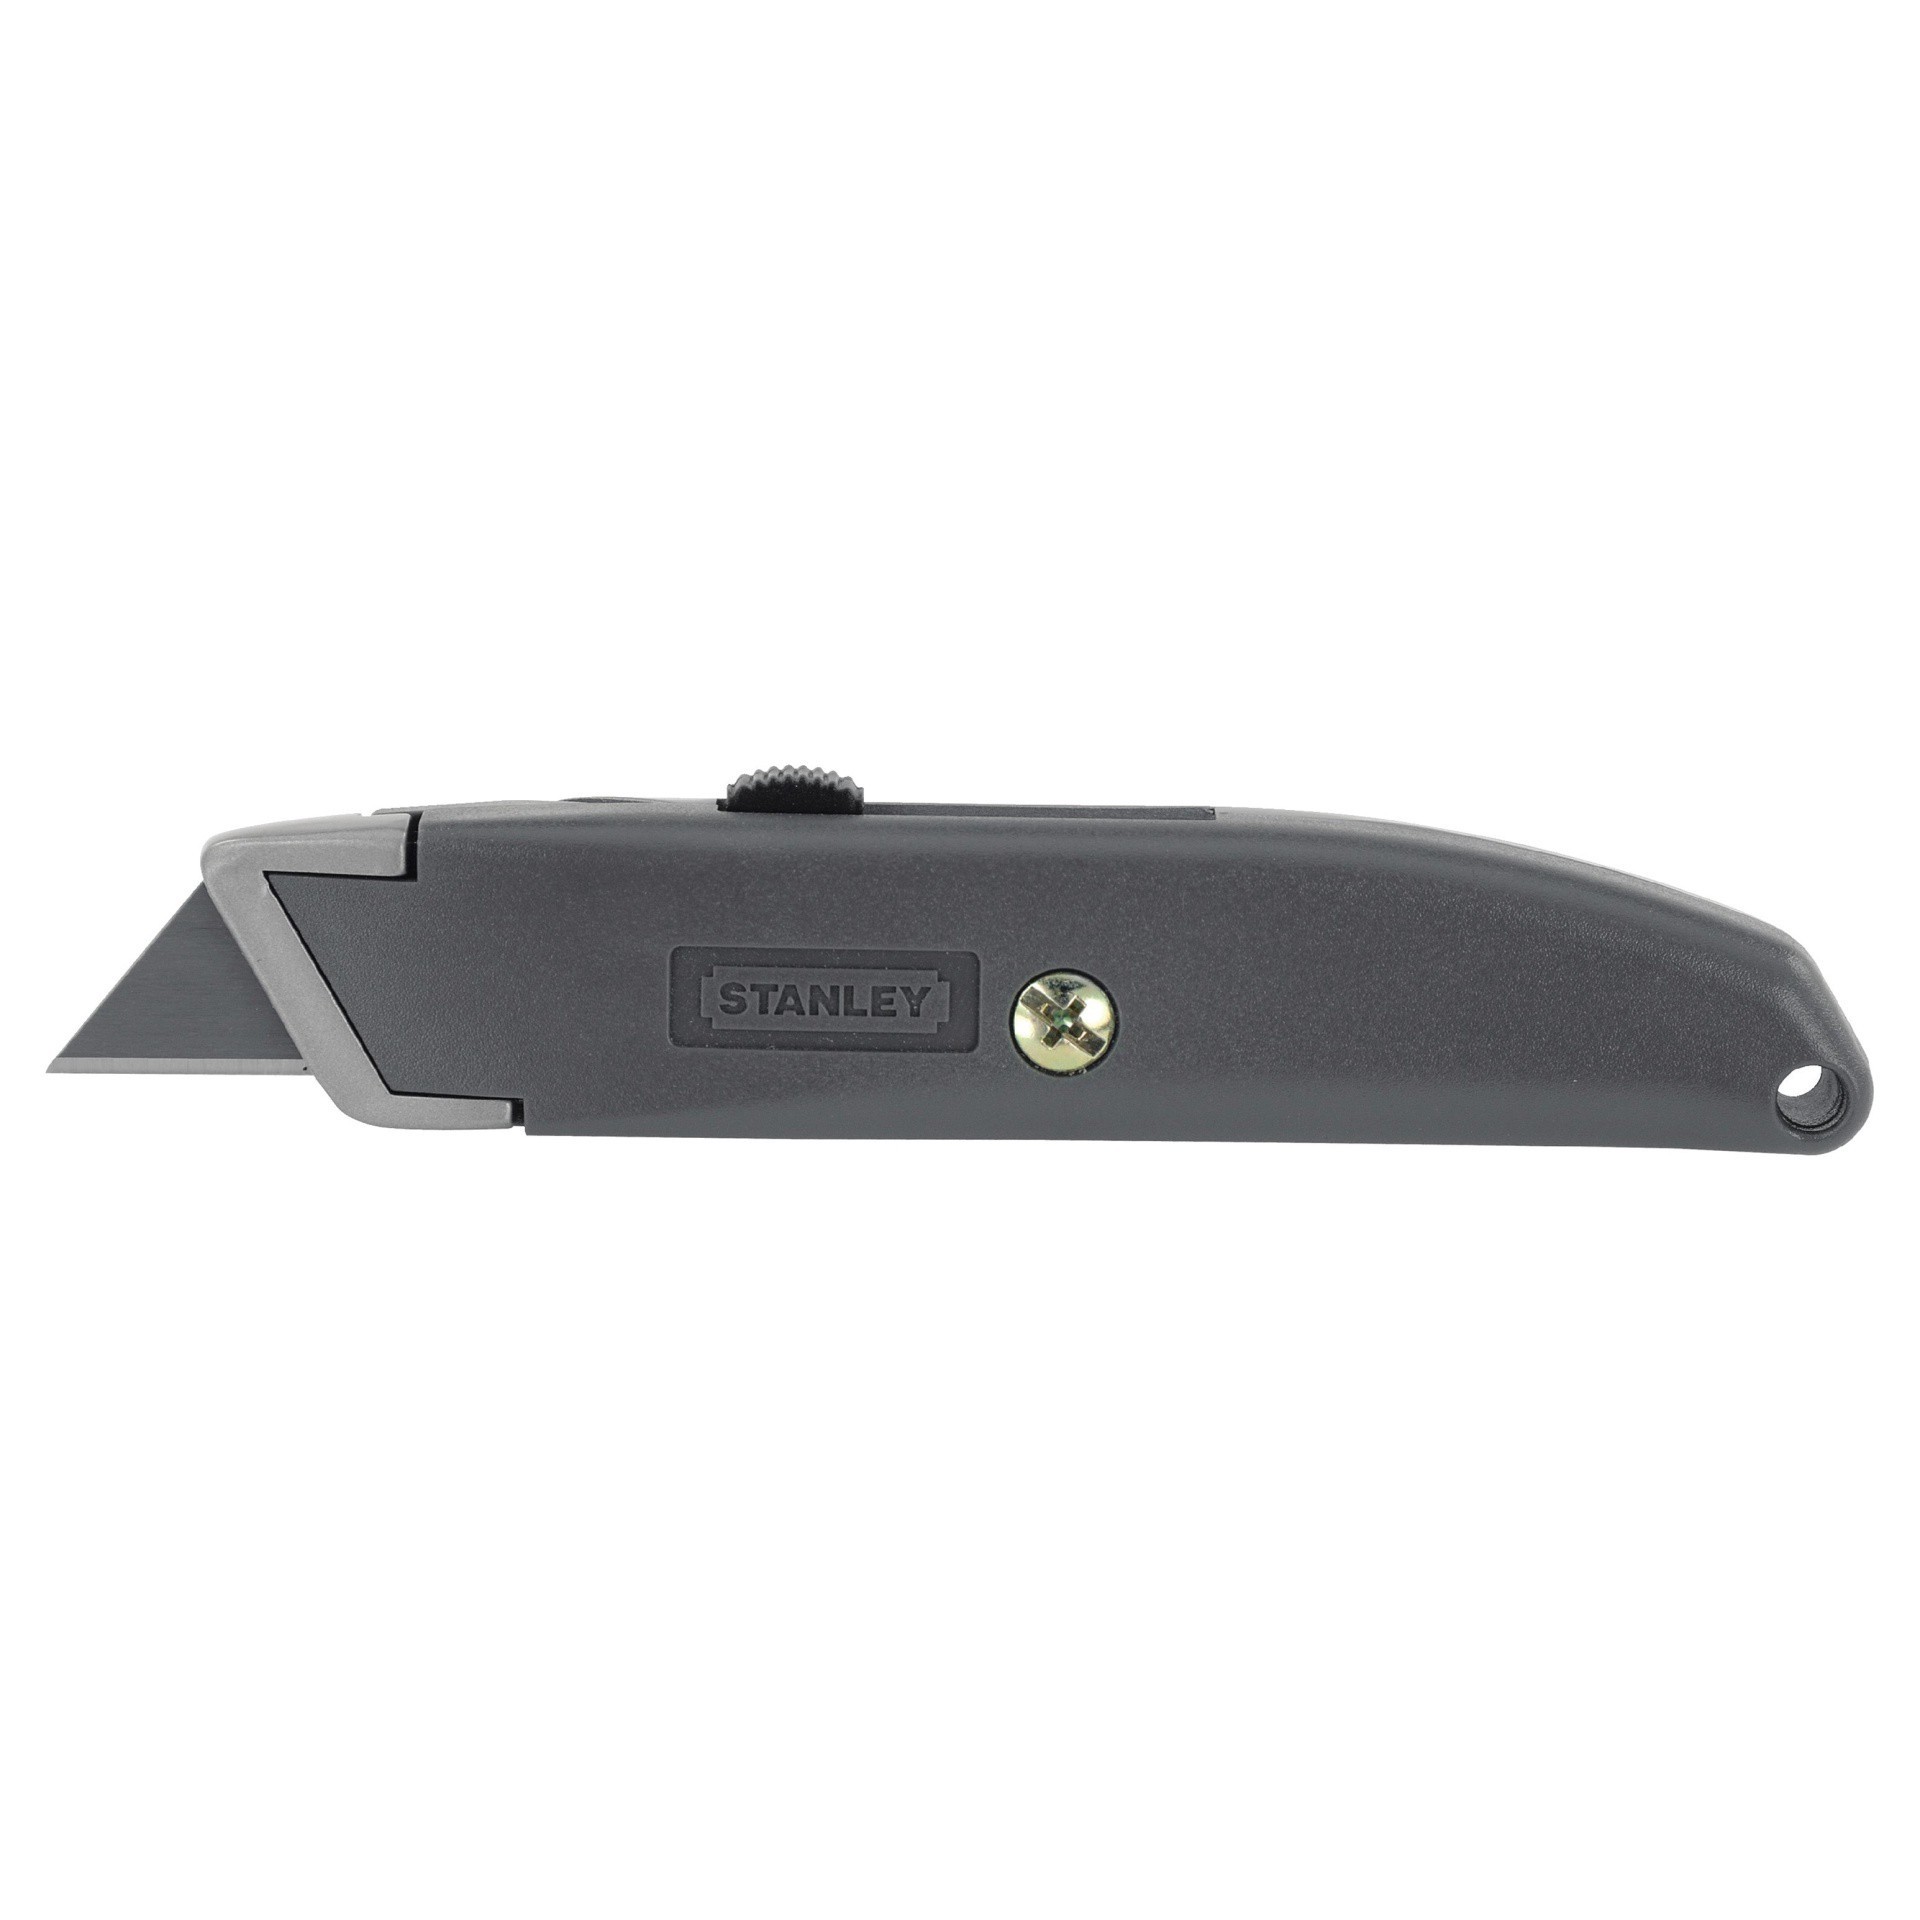 slide 1 of 2, STANLEY Retractable Utility Knife - 10-175, 1 ct